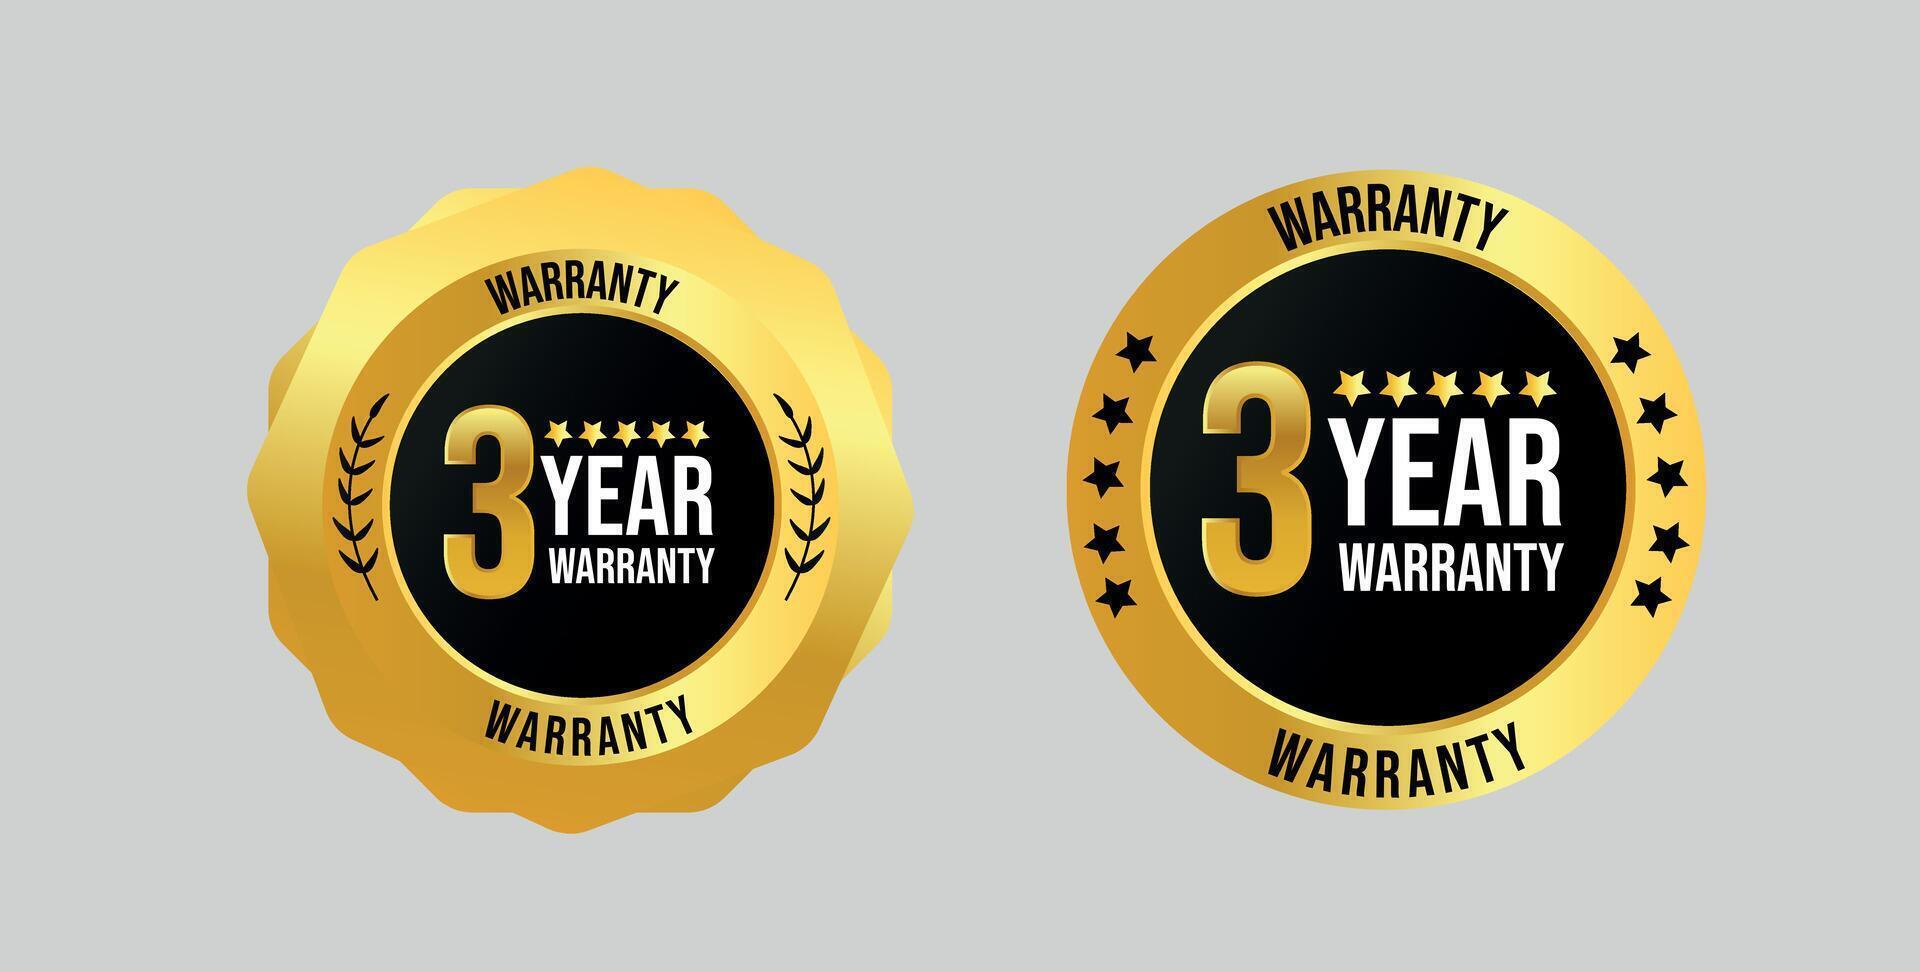 3 years of warranty. Three years warranty card with two different labels, stamps, icons design. 3 years warranty labels, stamp designs in golden and black colour. Quality assurance with warranty card vector